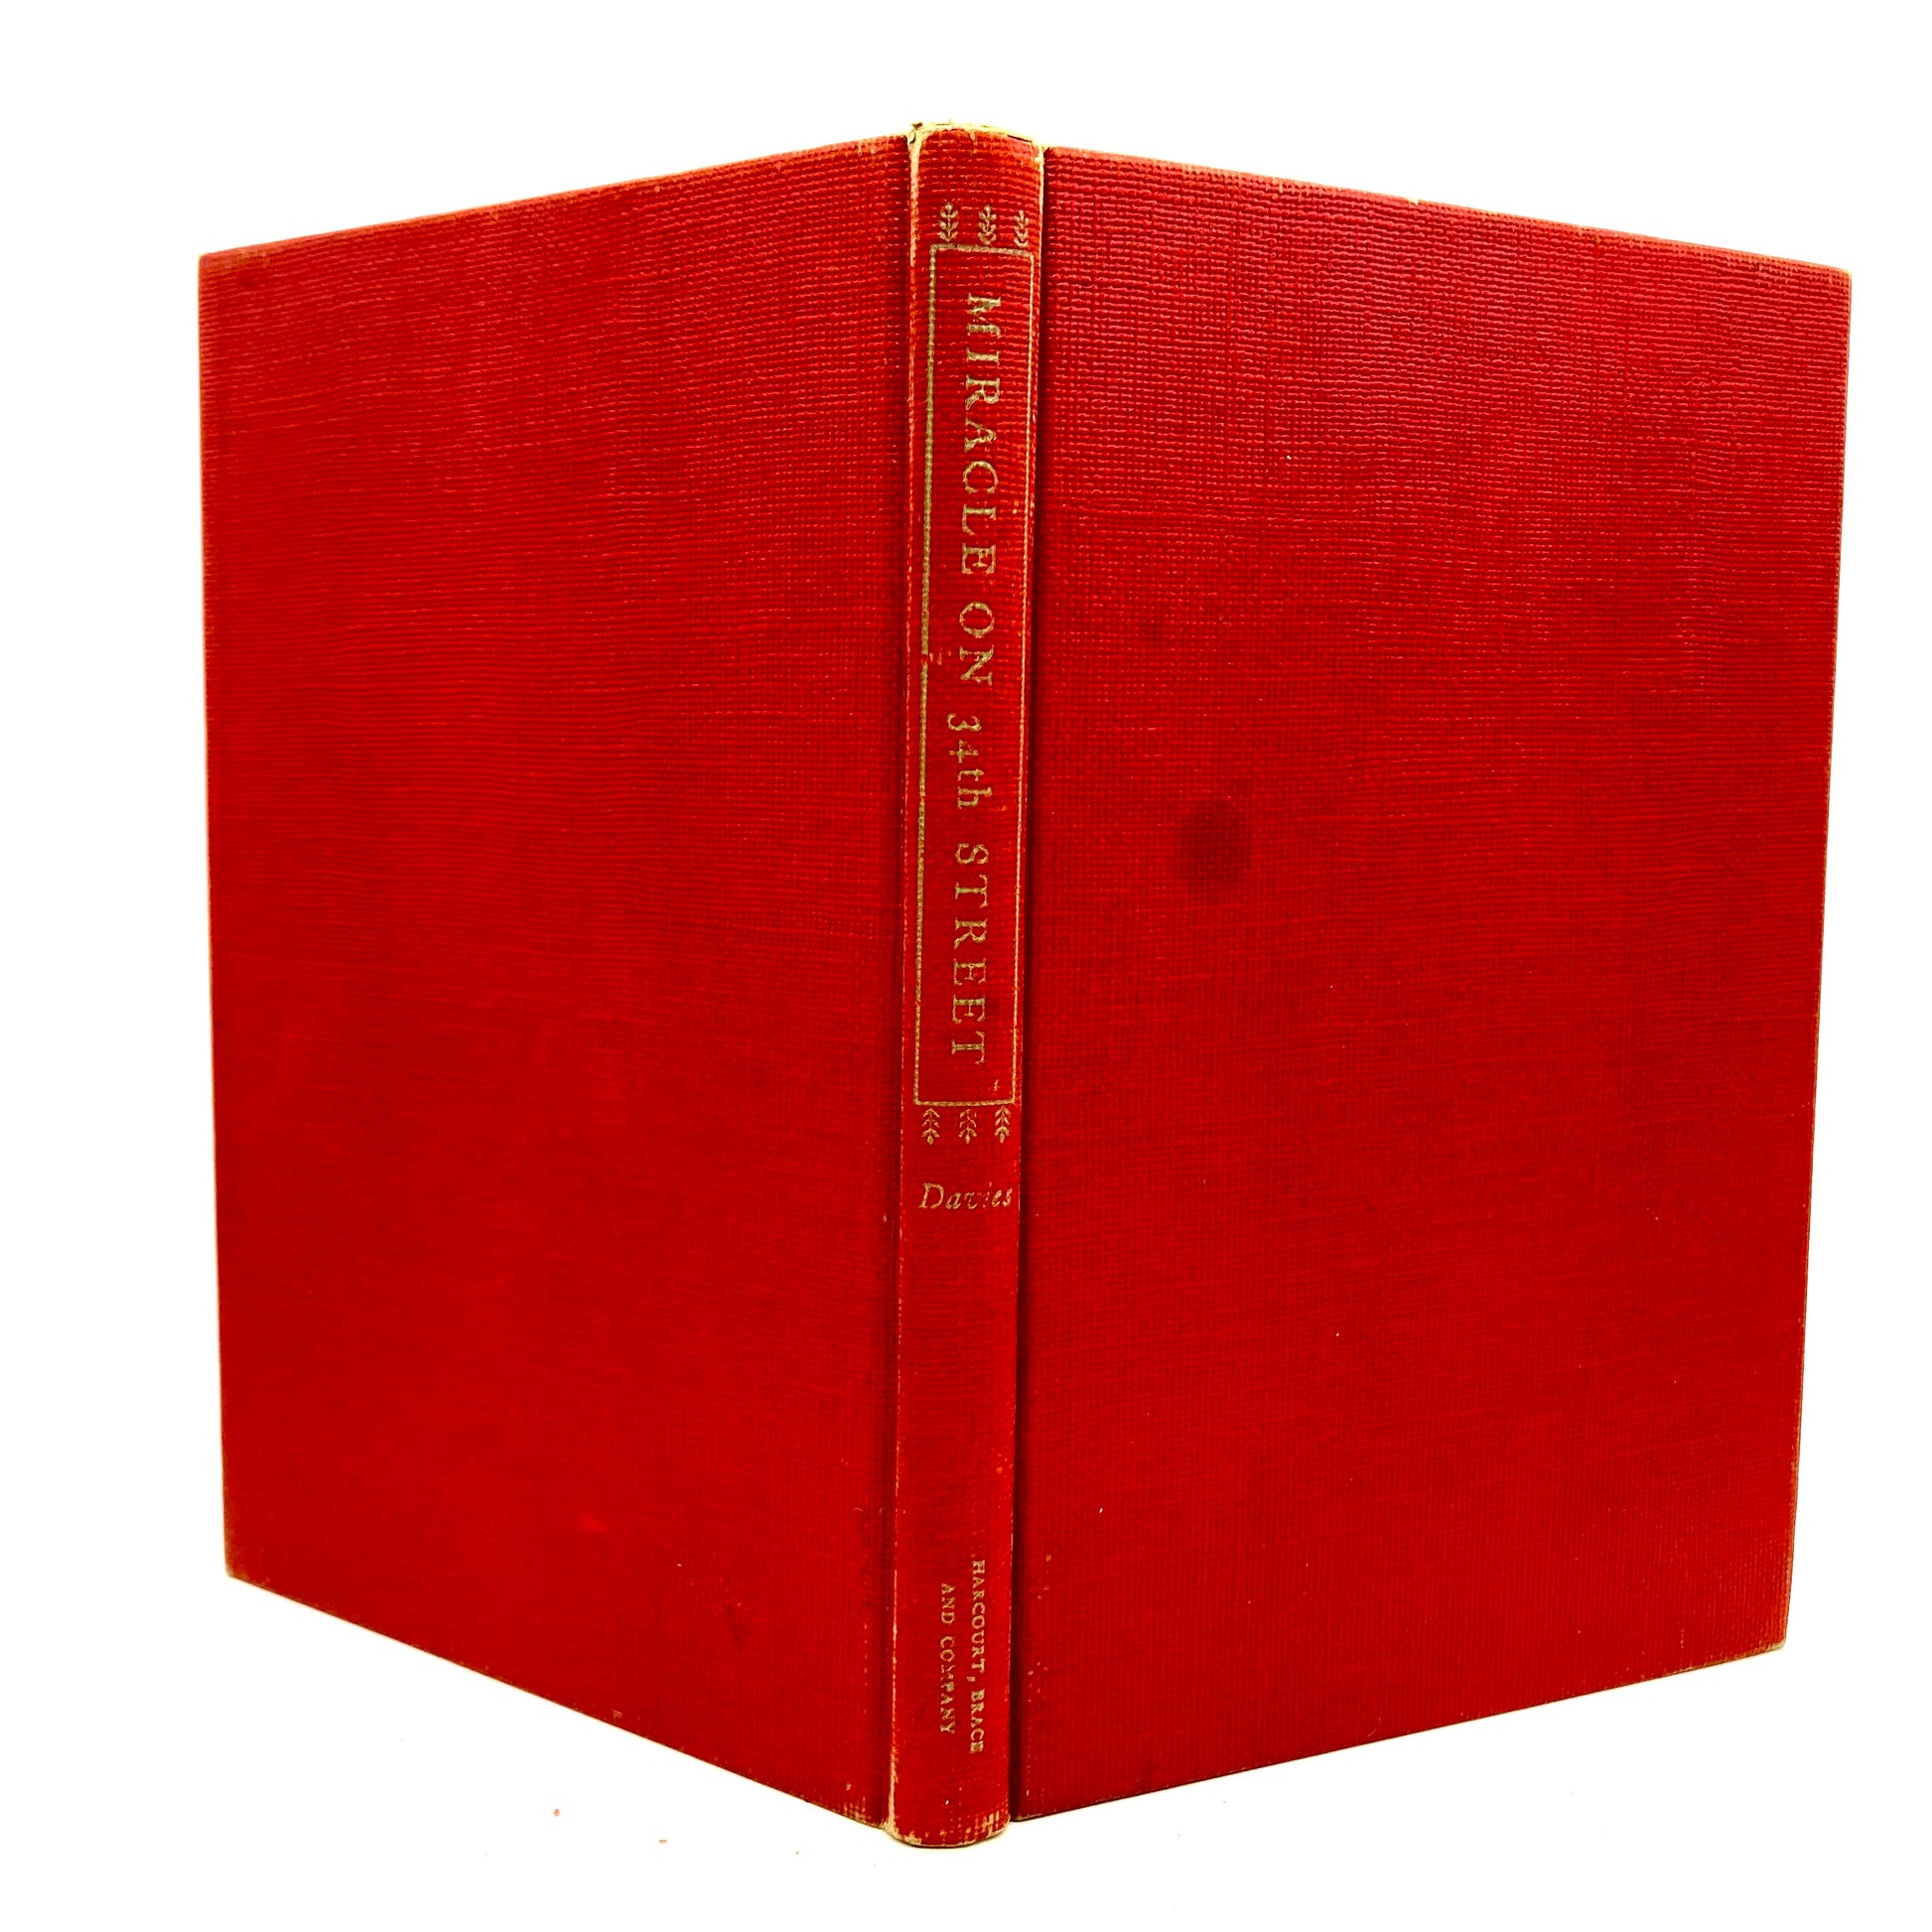 DAVIES, Valentine "Miracle on 34th Street" [Harcourt, Brace & Co, 1947] 1st Edition - Buzz Bookstore